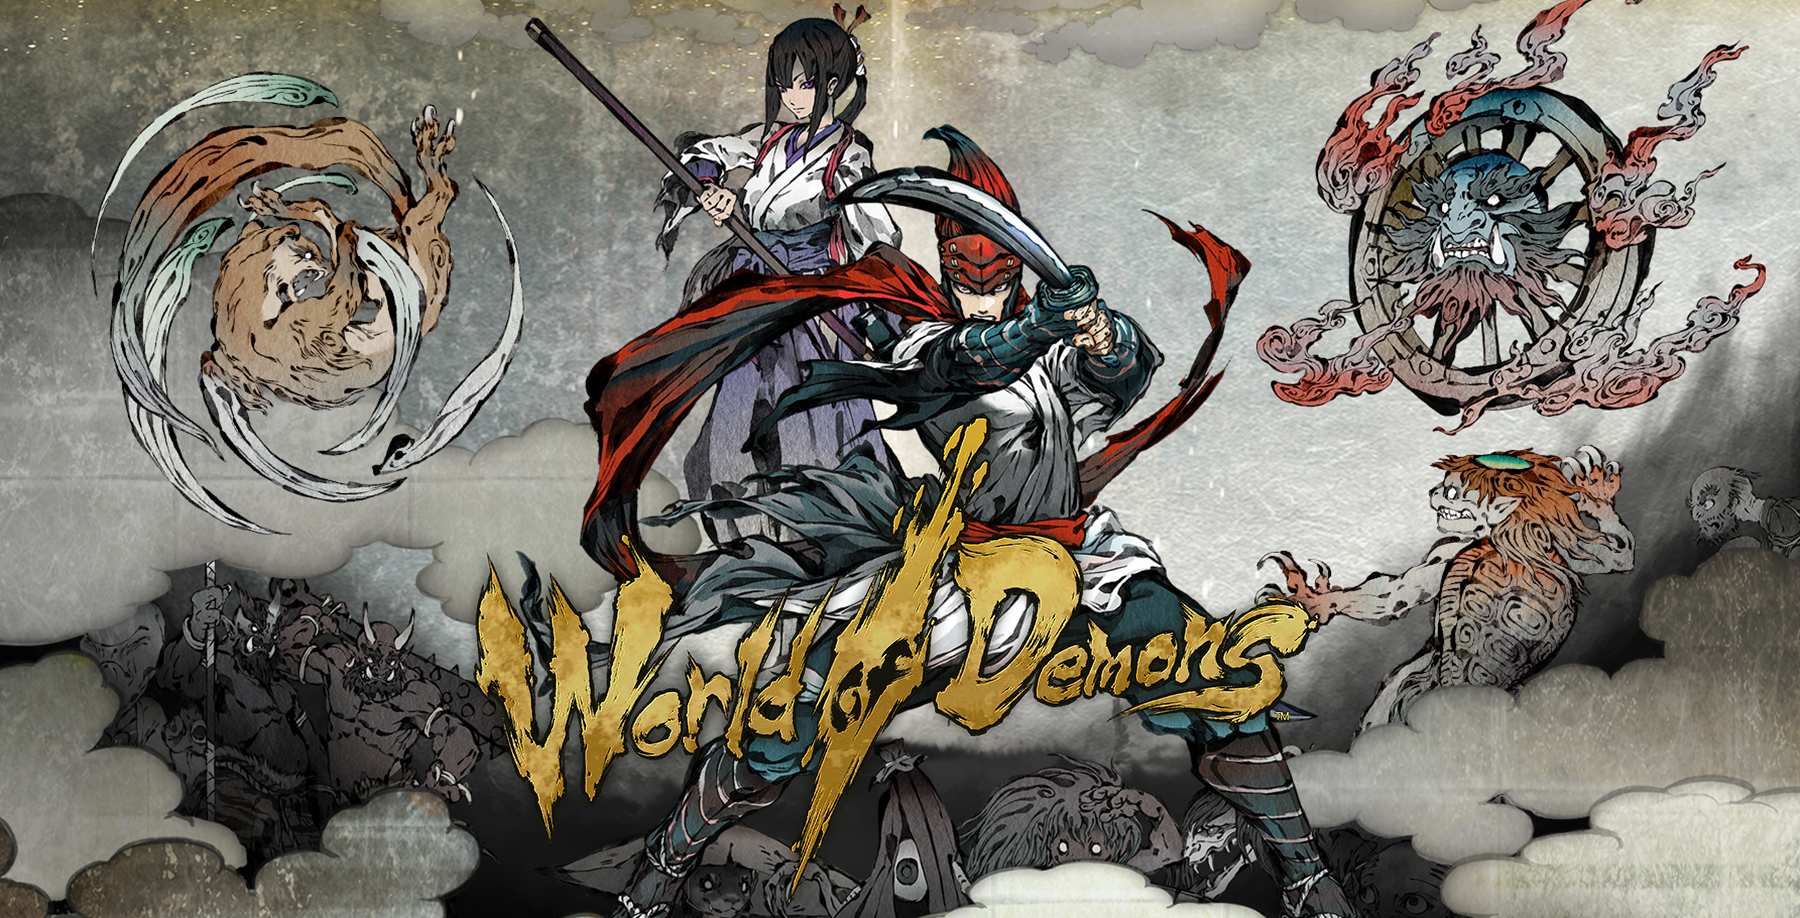 world of demons release date